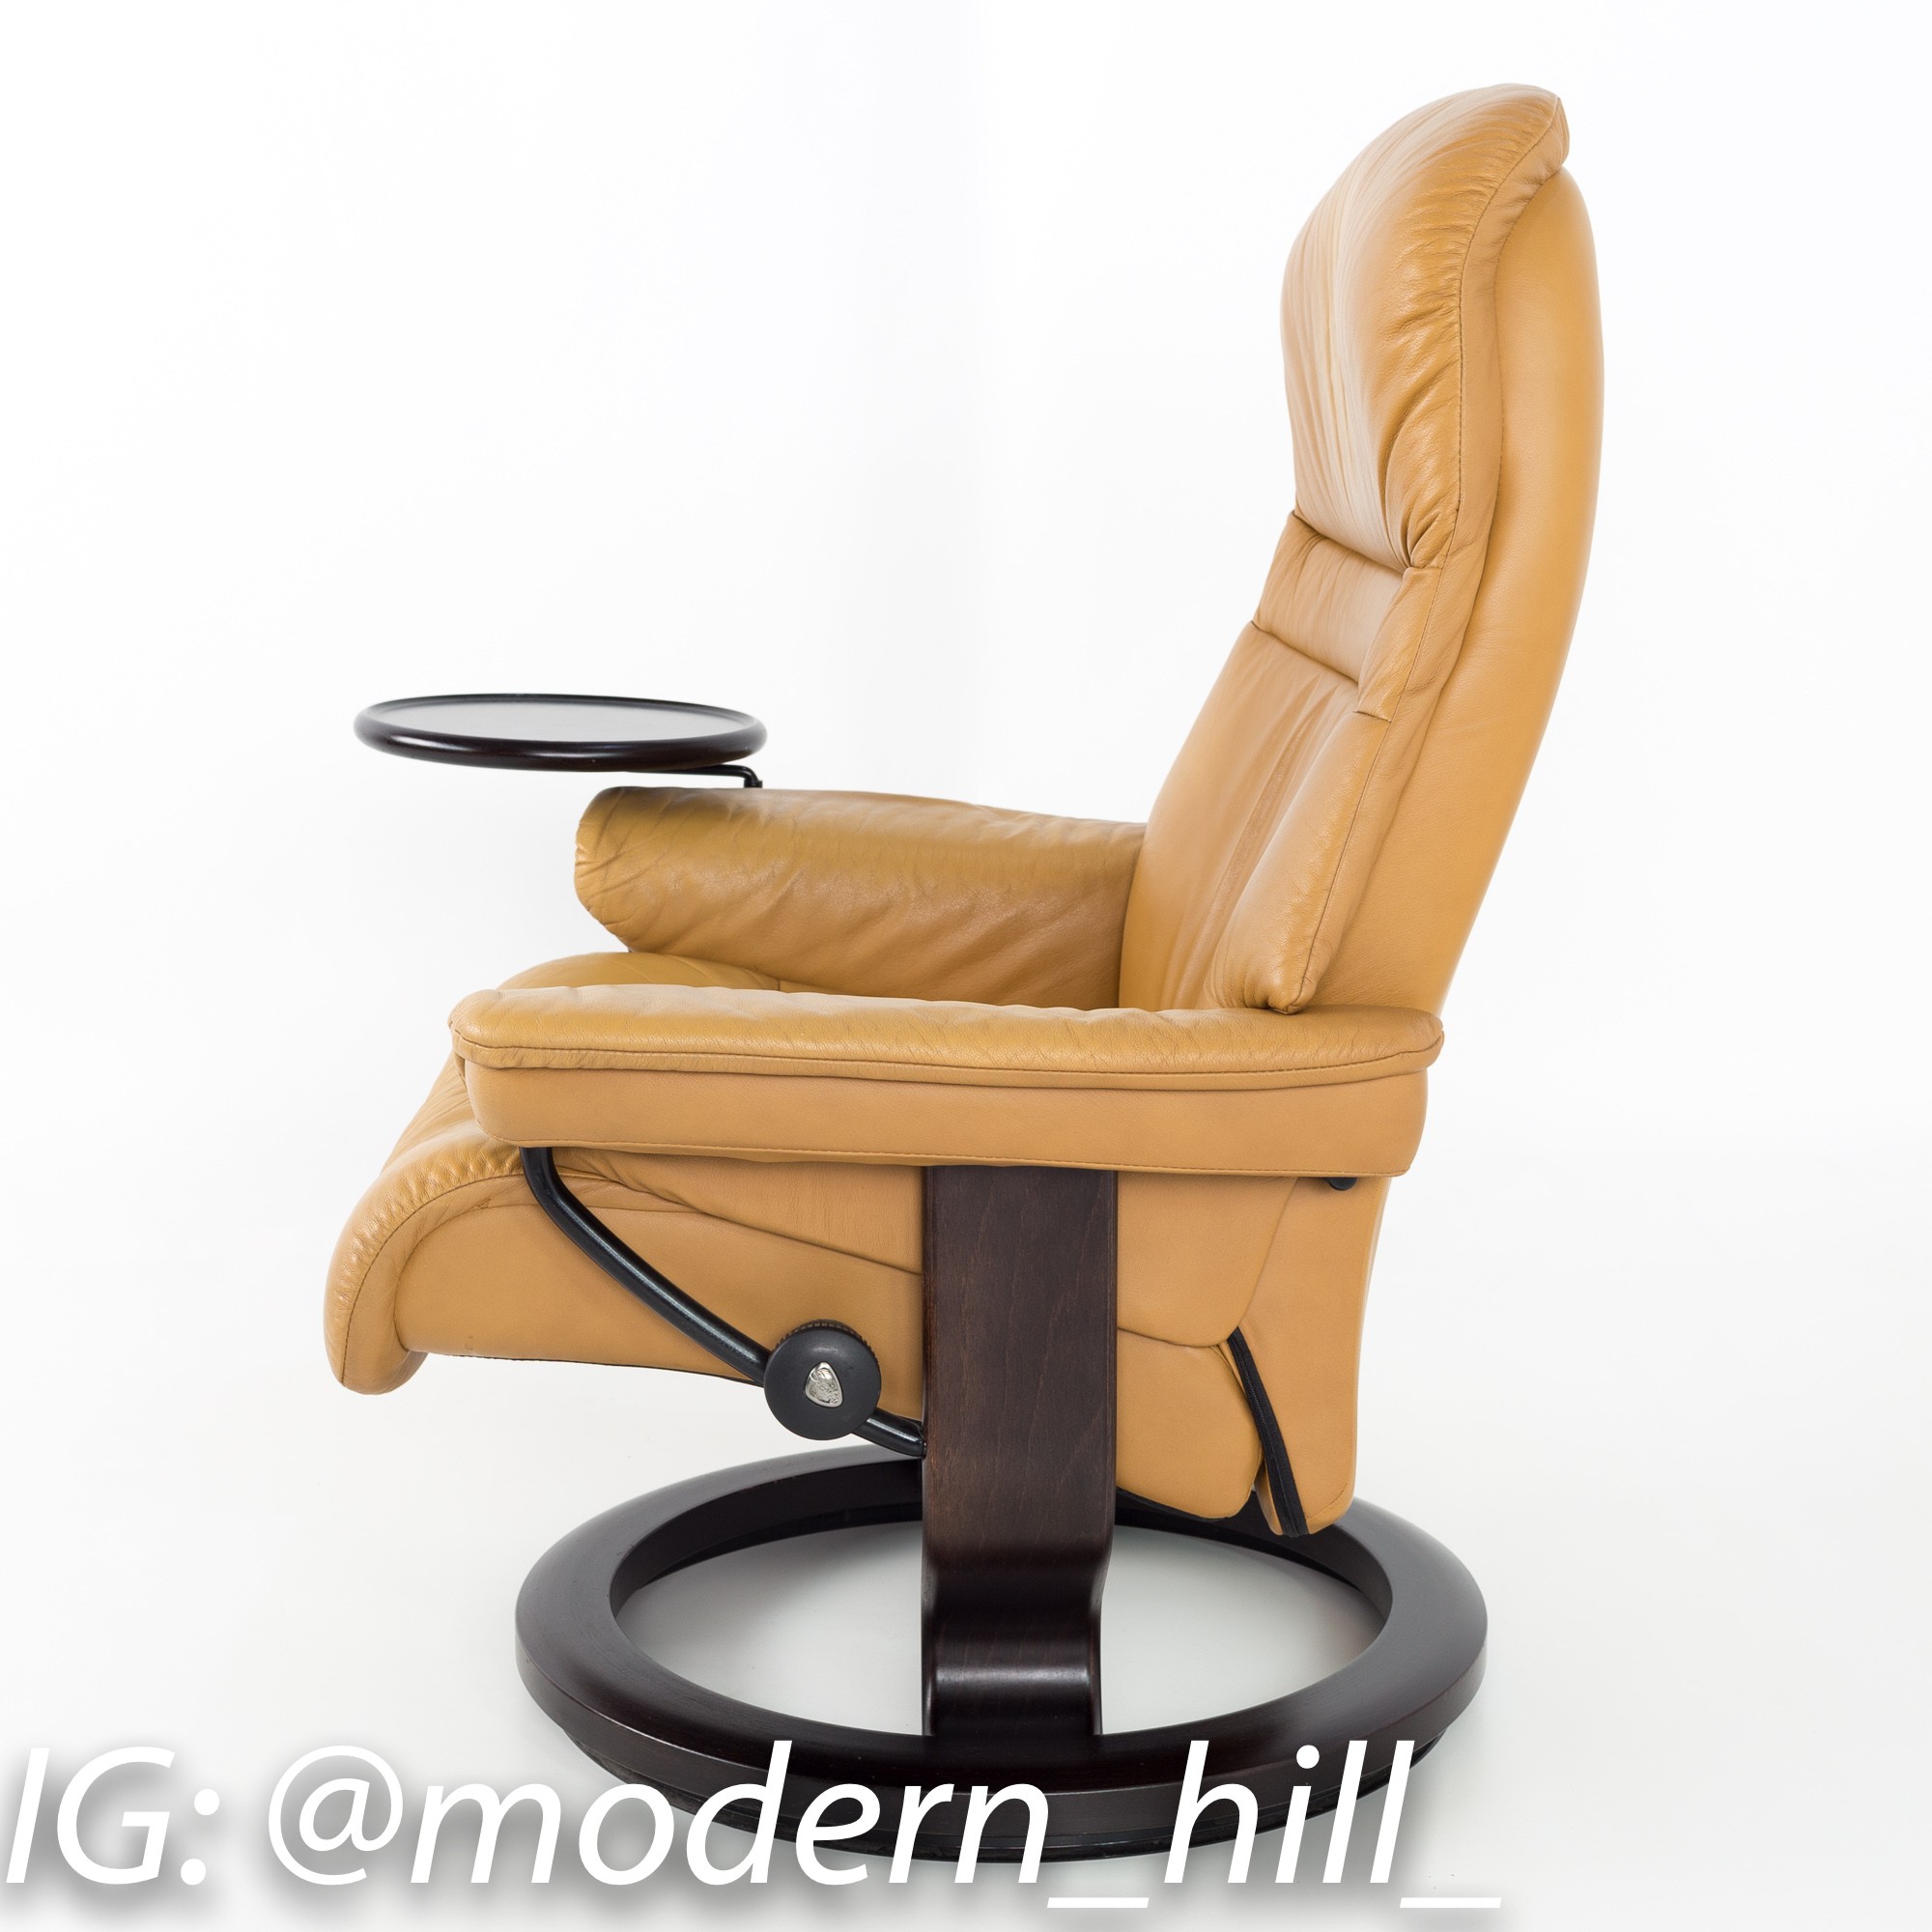 Ekornes Stressless Leather Chair and Ottoman with Side Table